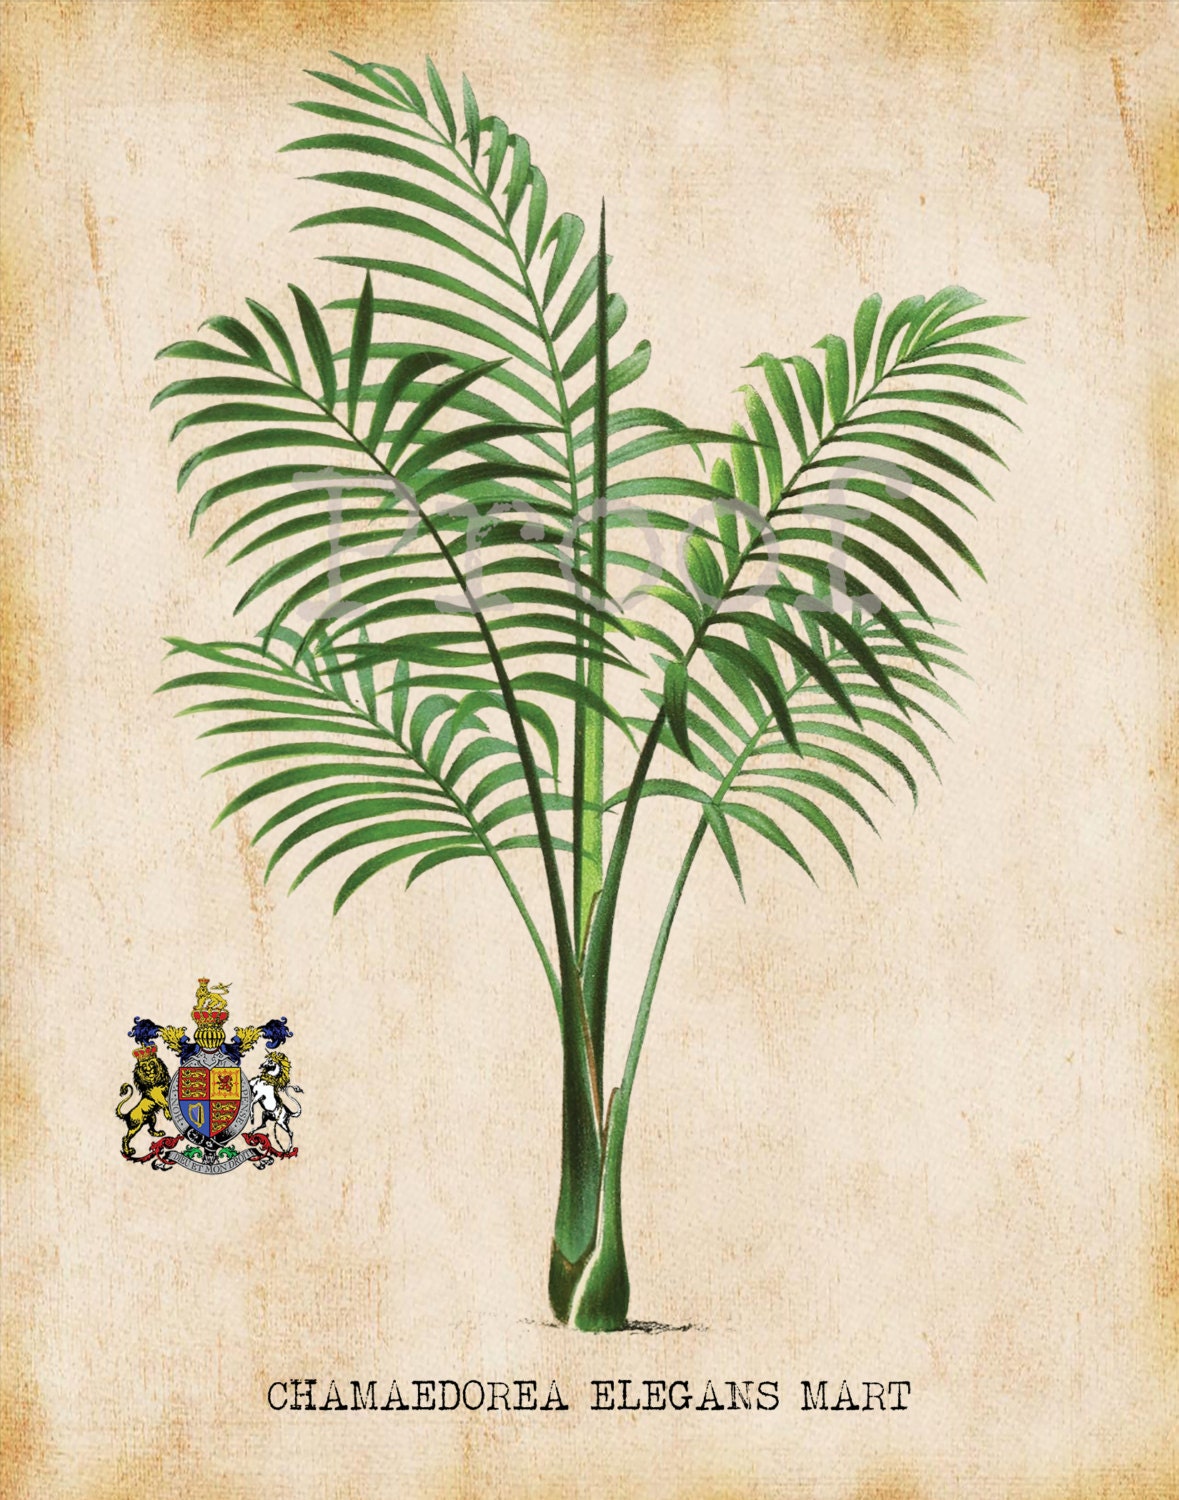 Tropical Palm Tree Art Prints Set For You To Print 7.5" x 9.5"  For Matting Antique Palms Wall Decor Botanical Print Picture Instant